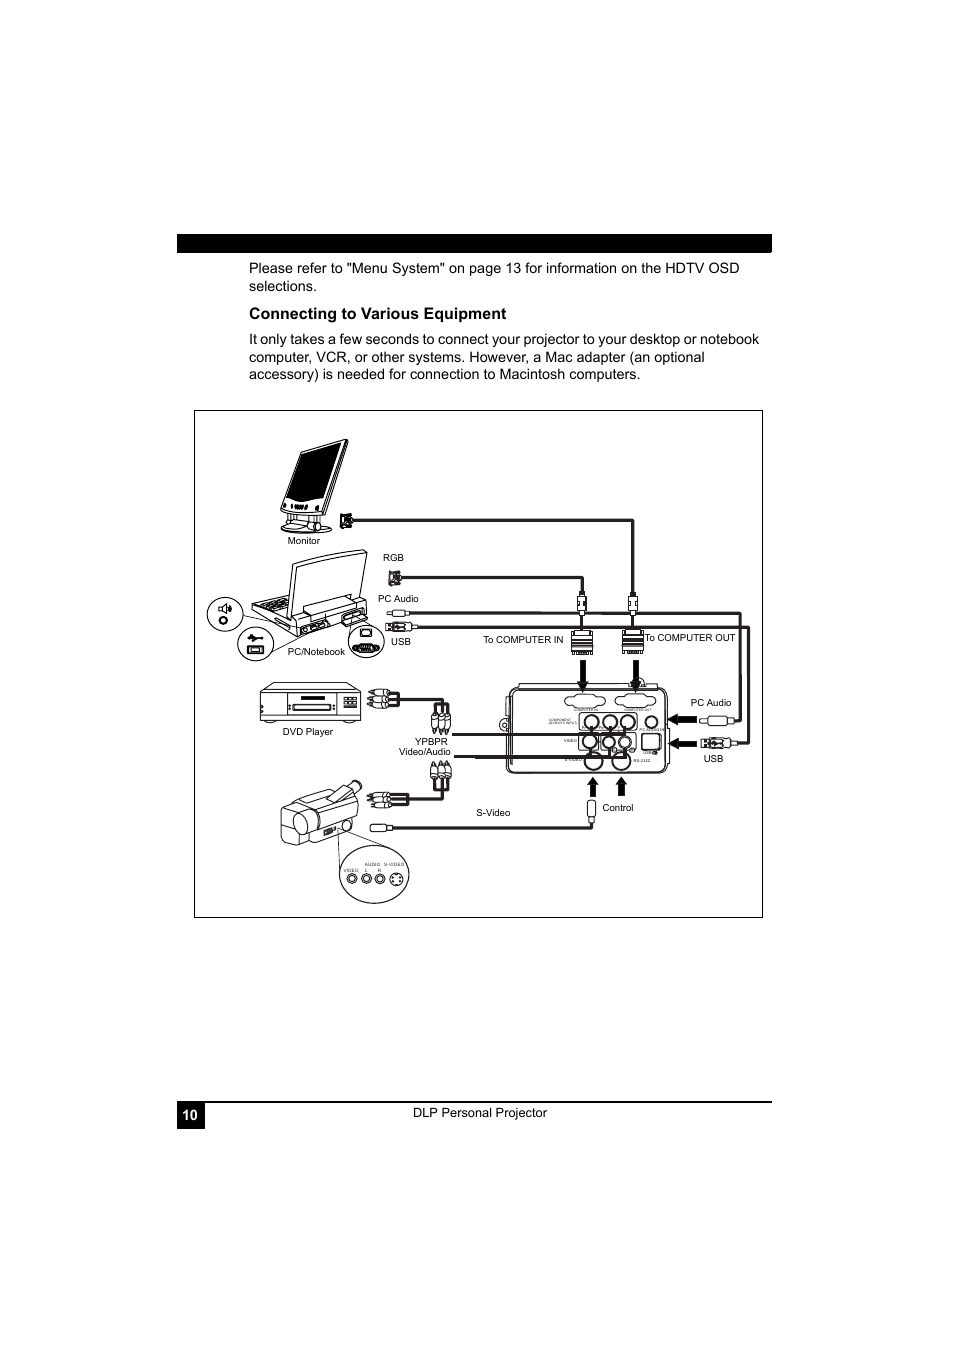 Connecting to various equipment, Dlp personal projector | LG RD-JT41 800X600 SVGA User Manual | Page 14 / 30